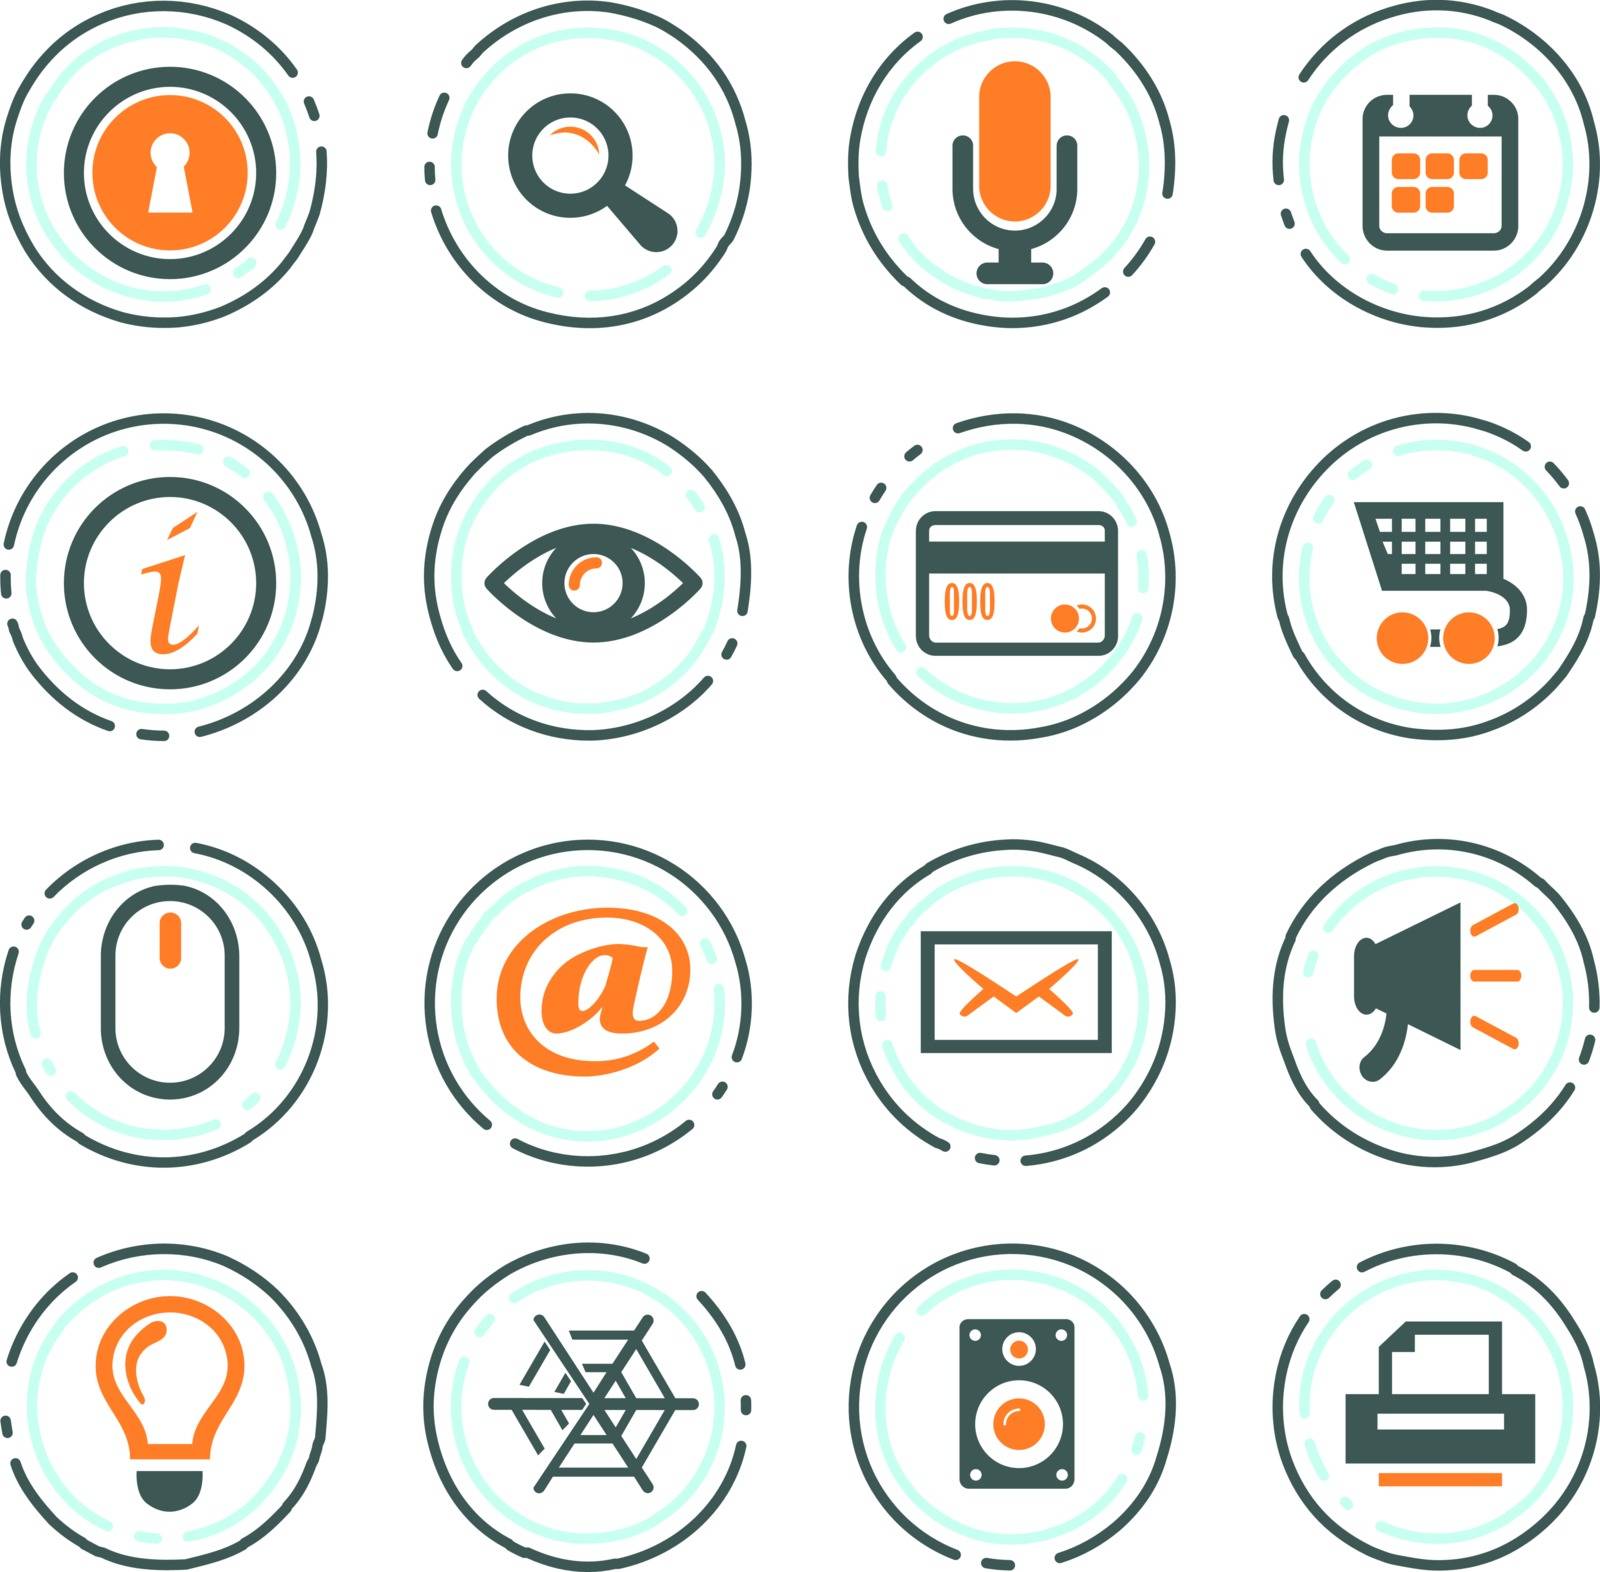 User interface vector icons for user interface design